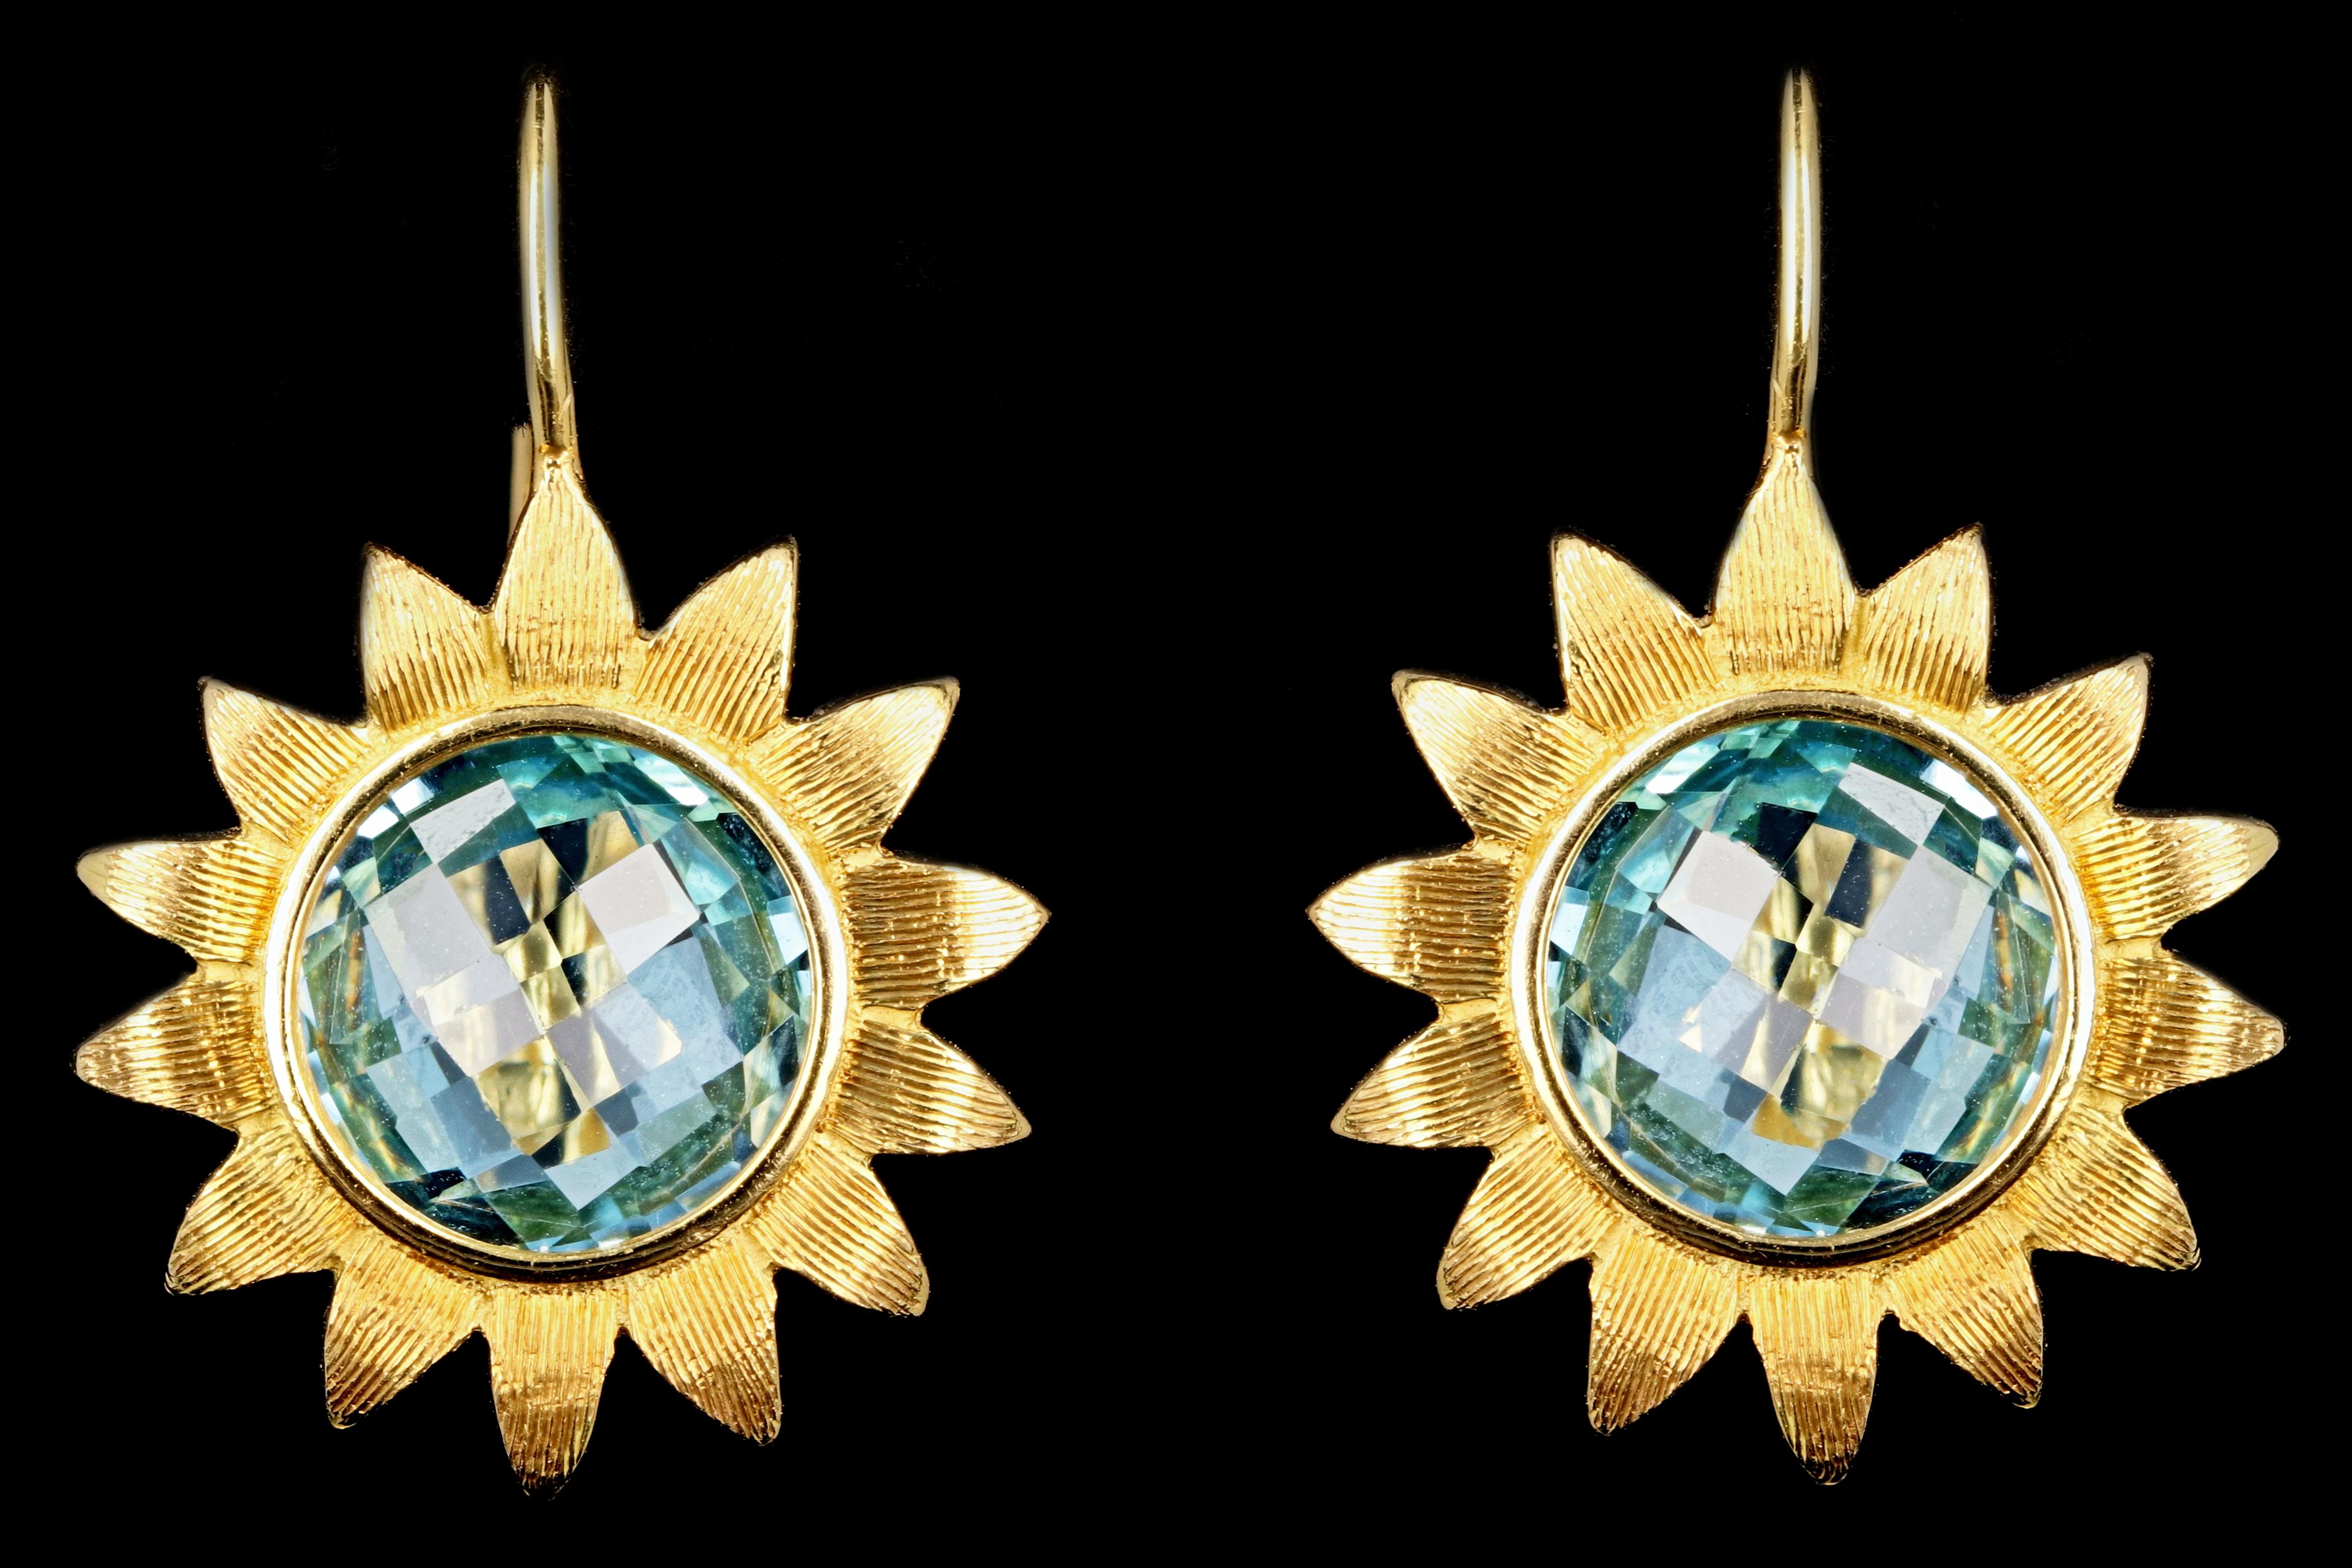 Designer: Bielka

Era: Modern

Composition: 18k yellow gold

Primary Stone: Briolette round cut blue topaz

Carat Weight: 6 carats total

Earring Weight: weighs 7.7 pennyweights

Earring Height: 20mm

Earring Length: 15mm

